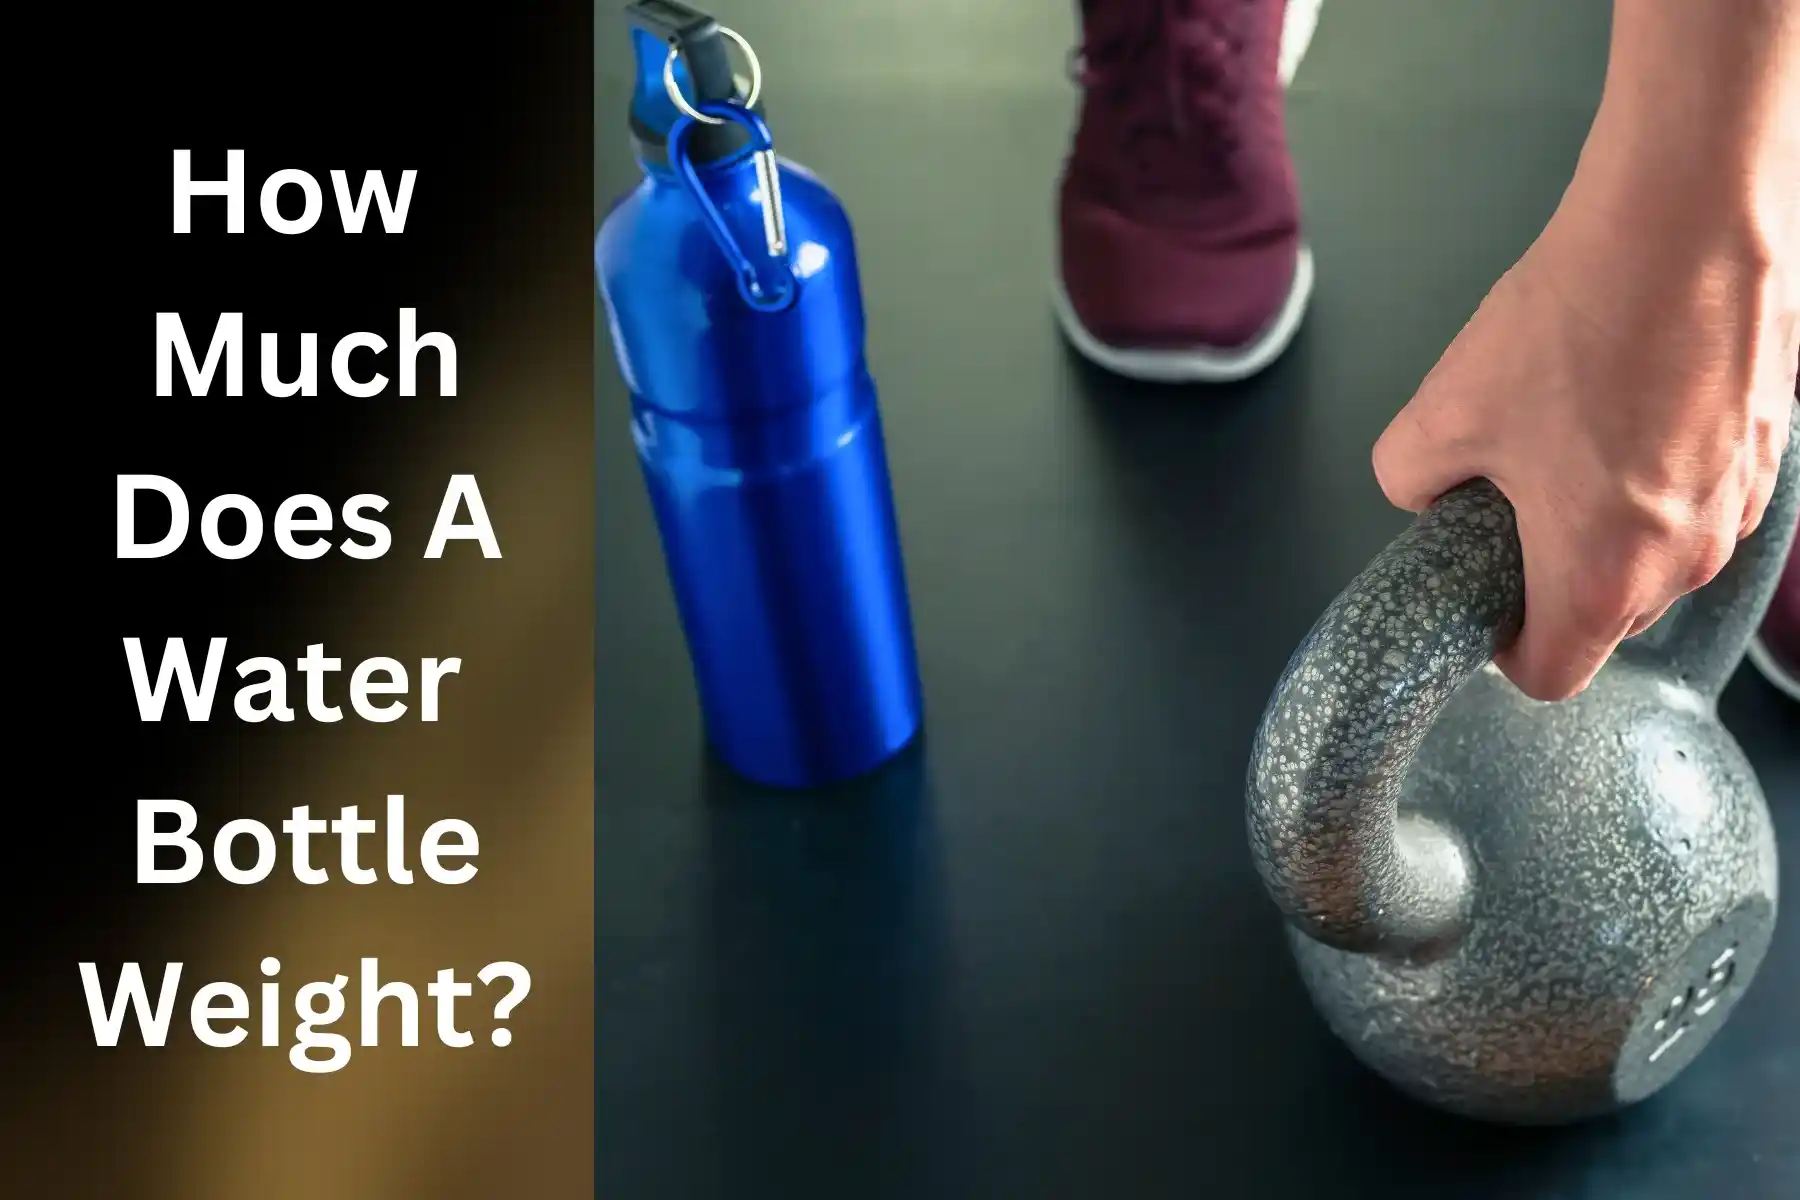 how much does a water bottle weigh